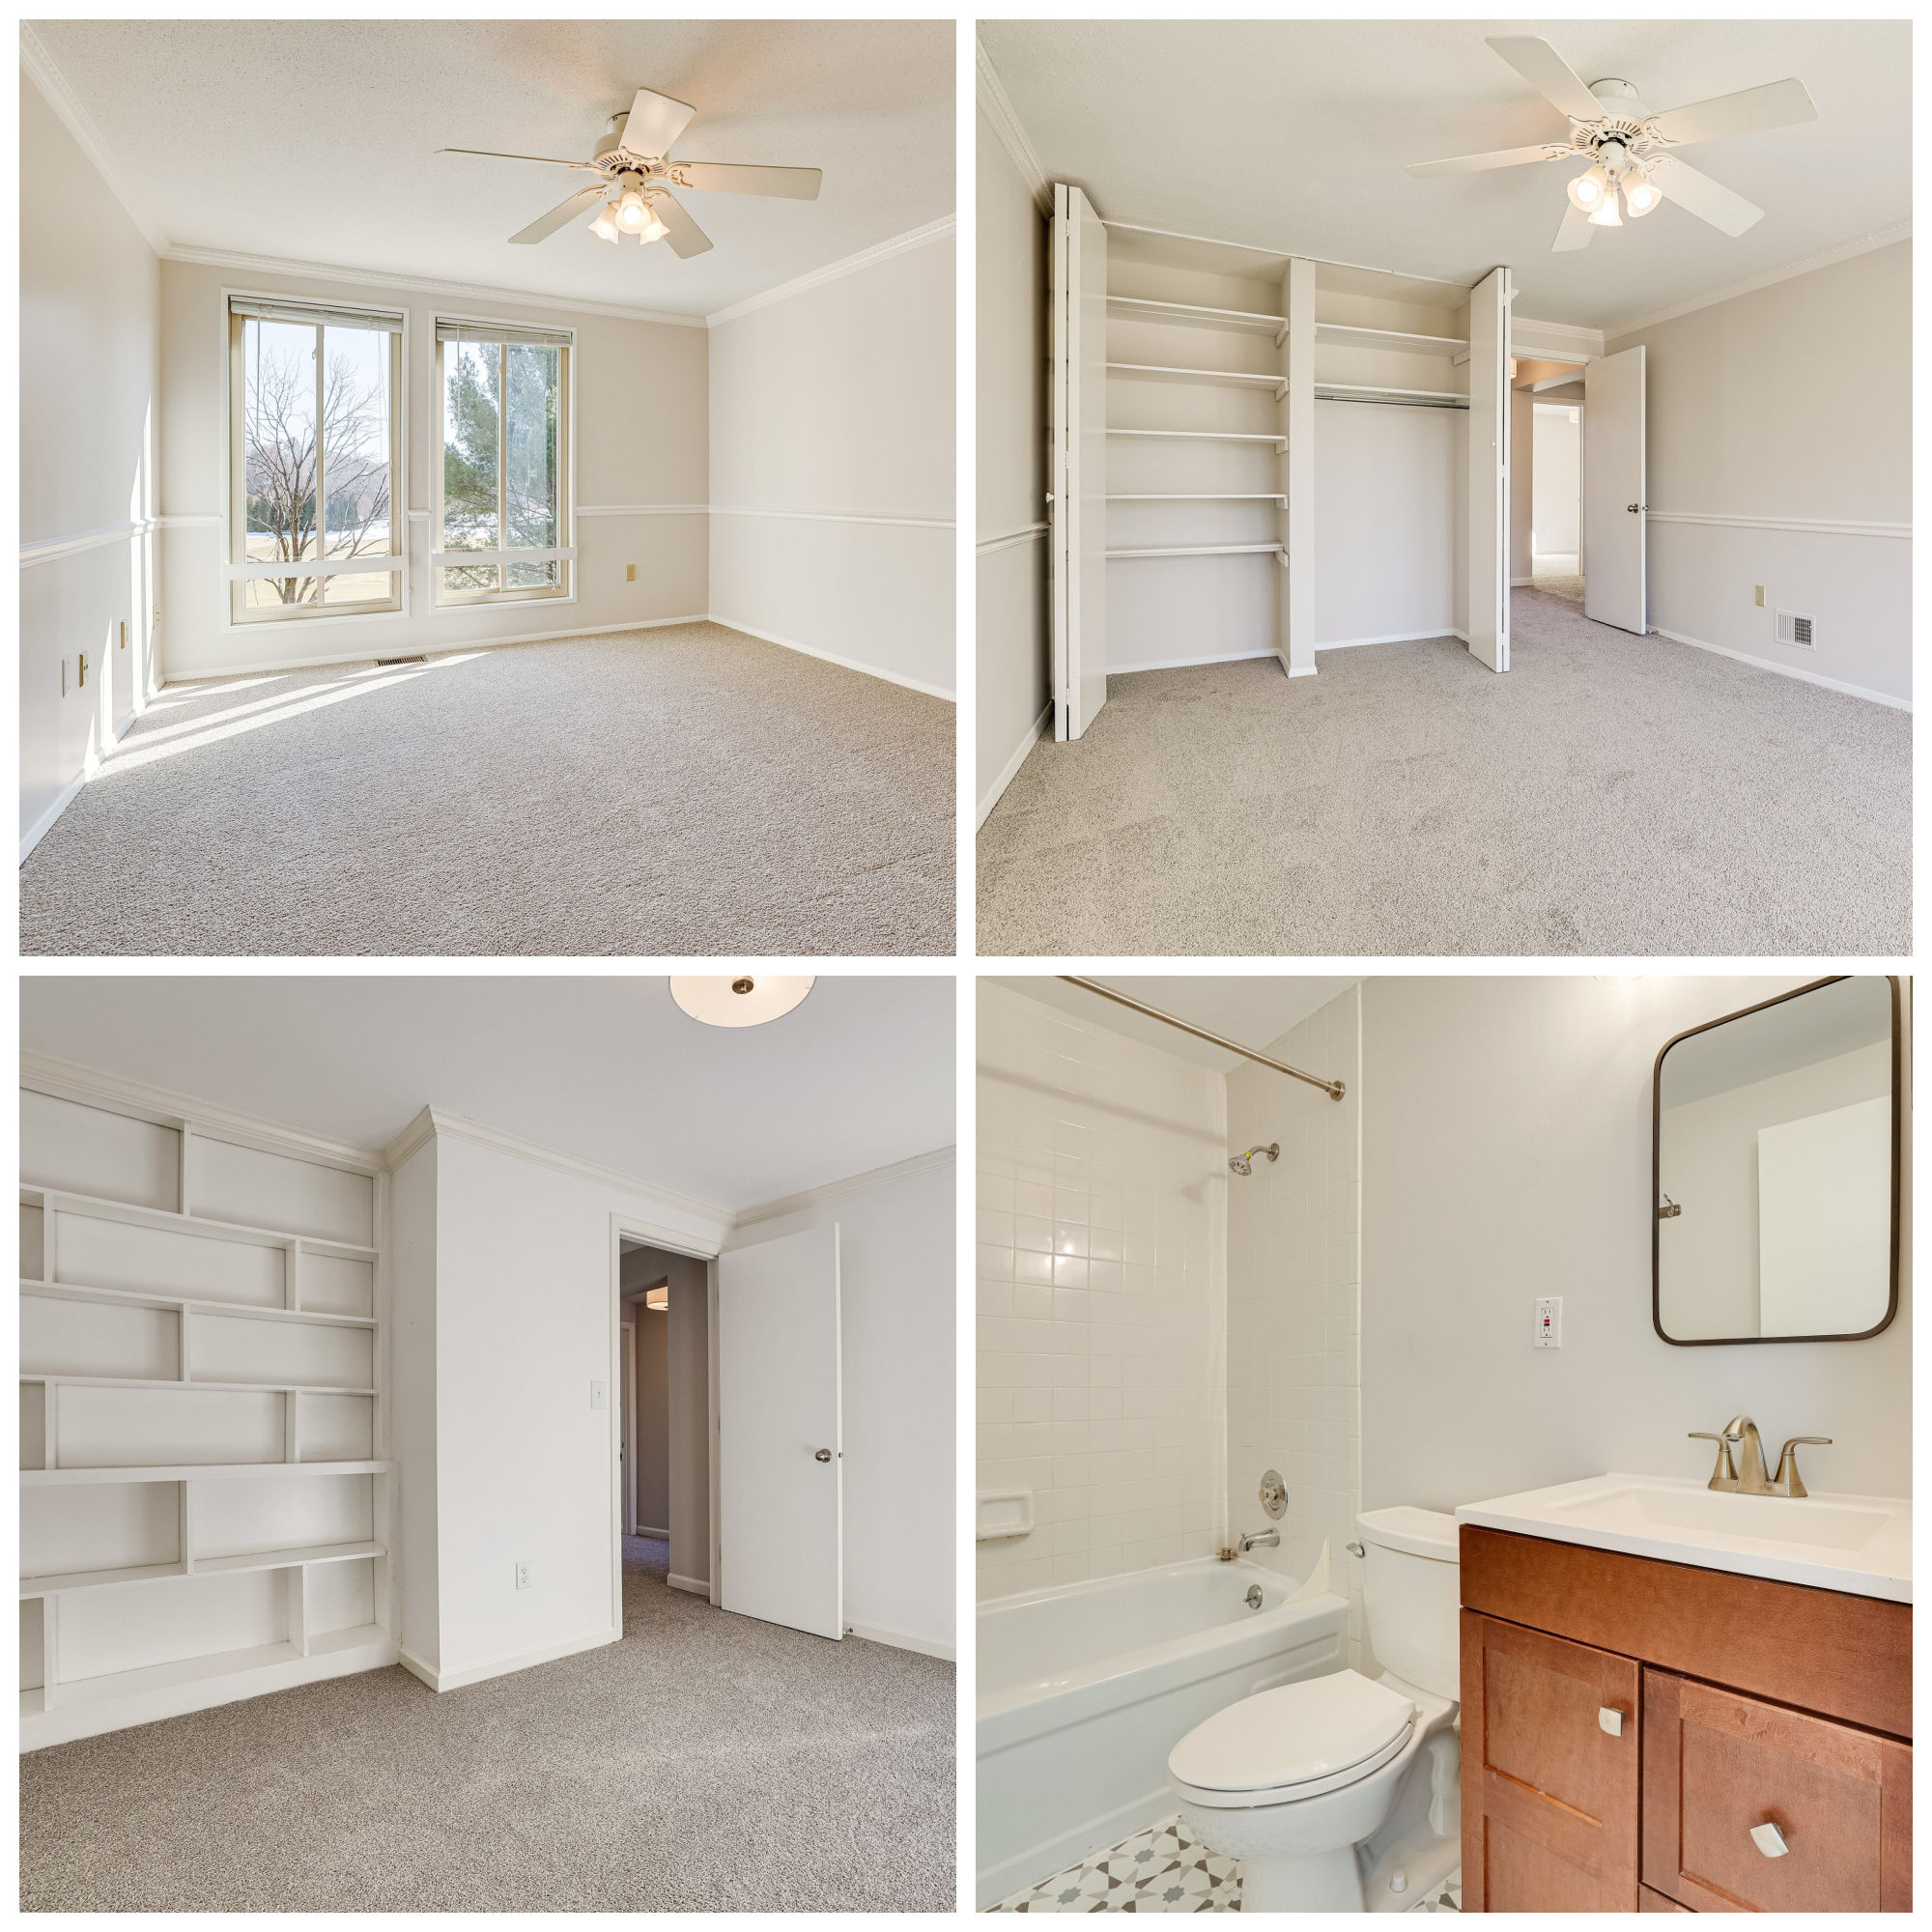 1813 N Shore Ct, Reston- Additional Bedrooms and Bath